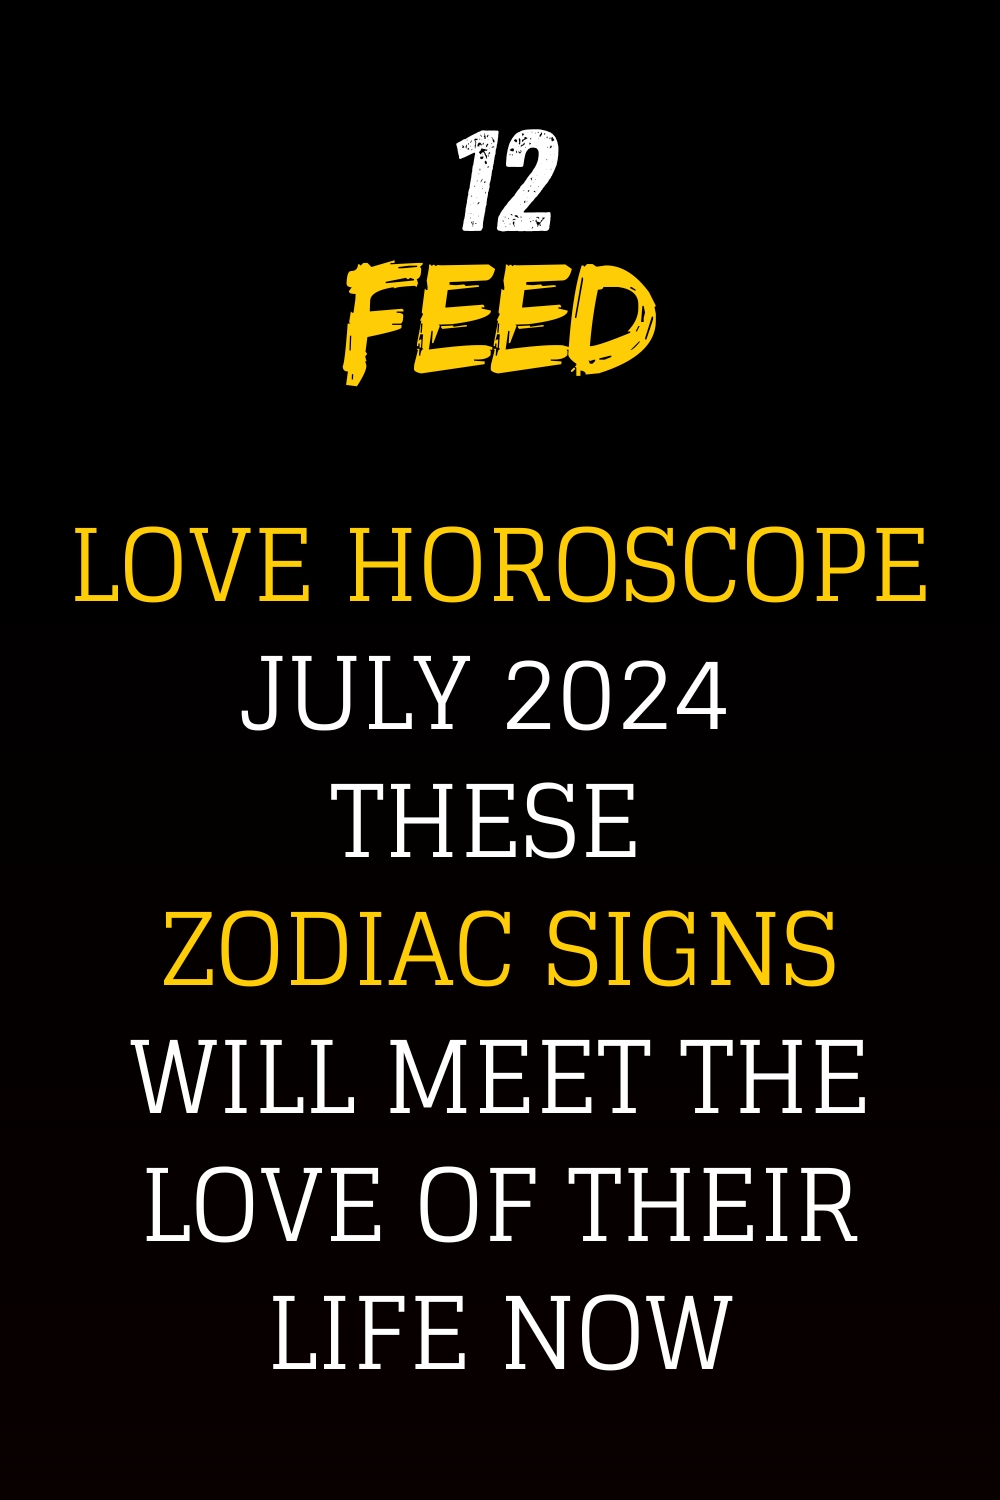 Love Horoscope July 2024 These Zodiac Signs Will Meet The Love Of Their Life Now